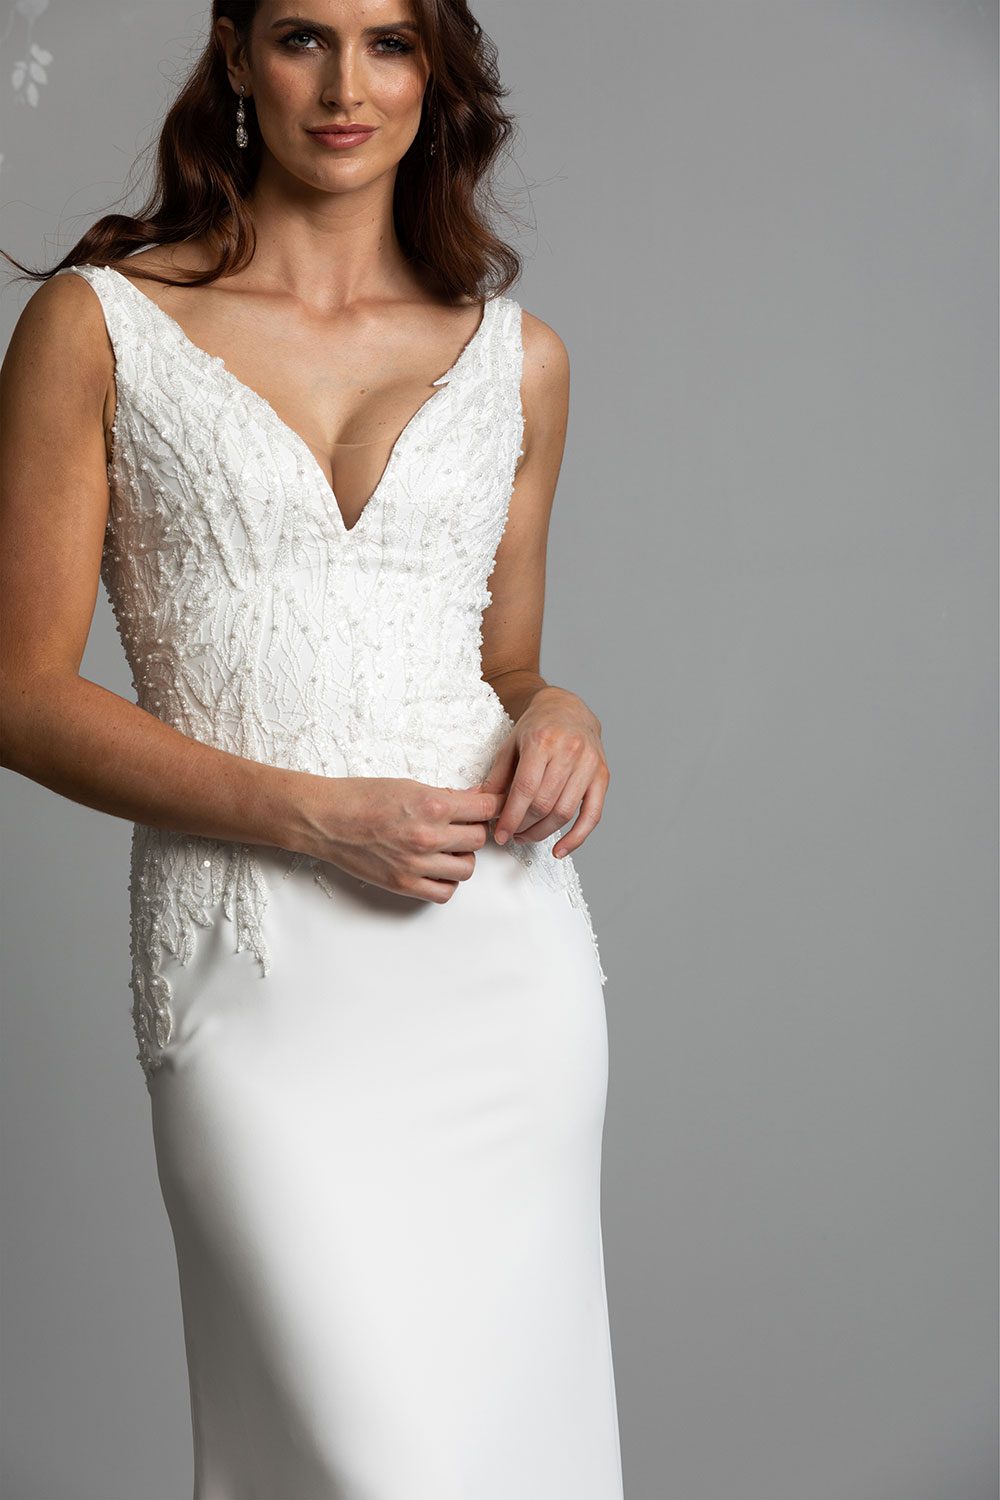 Gene Wedding Dress by Vinka Design - Crafted in a luxe matte bridal crepe with beautiful hand-appliqued, beaded lace adorned with delicate seed pearls and dazzling iridescent sequins that shimmer with movement. The bodice is styled with a plunging V-neckline and a complementary V-back.